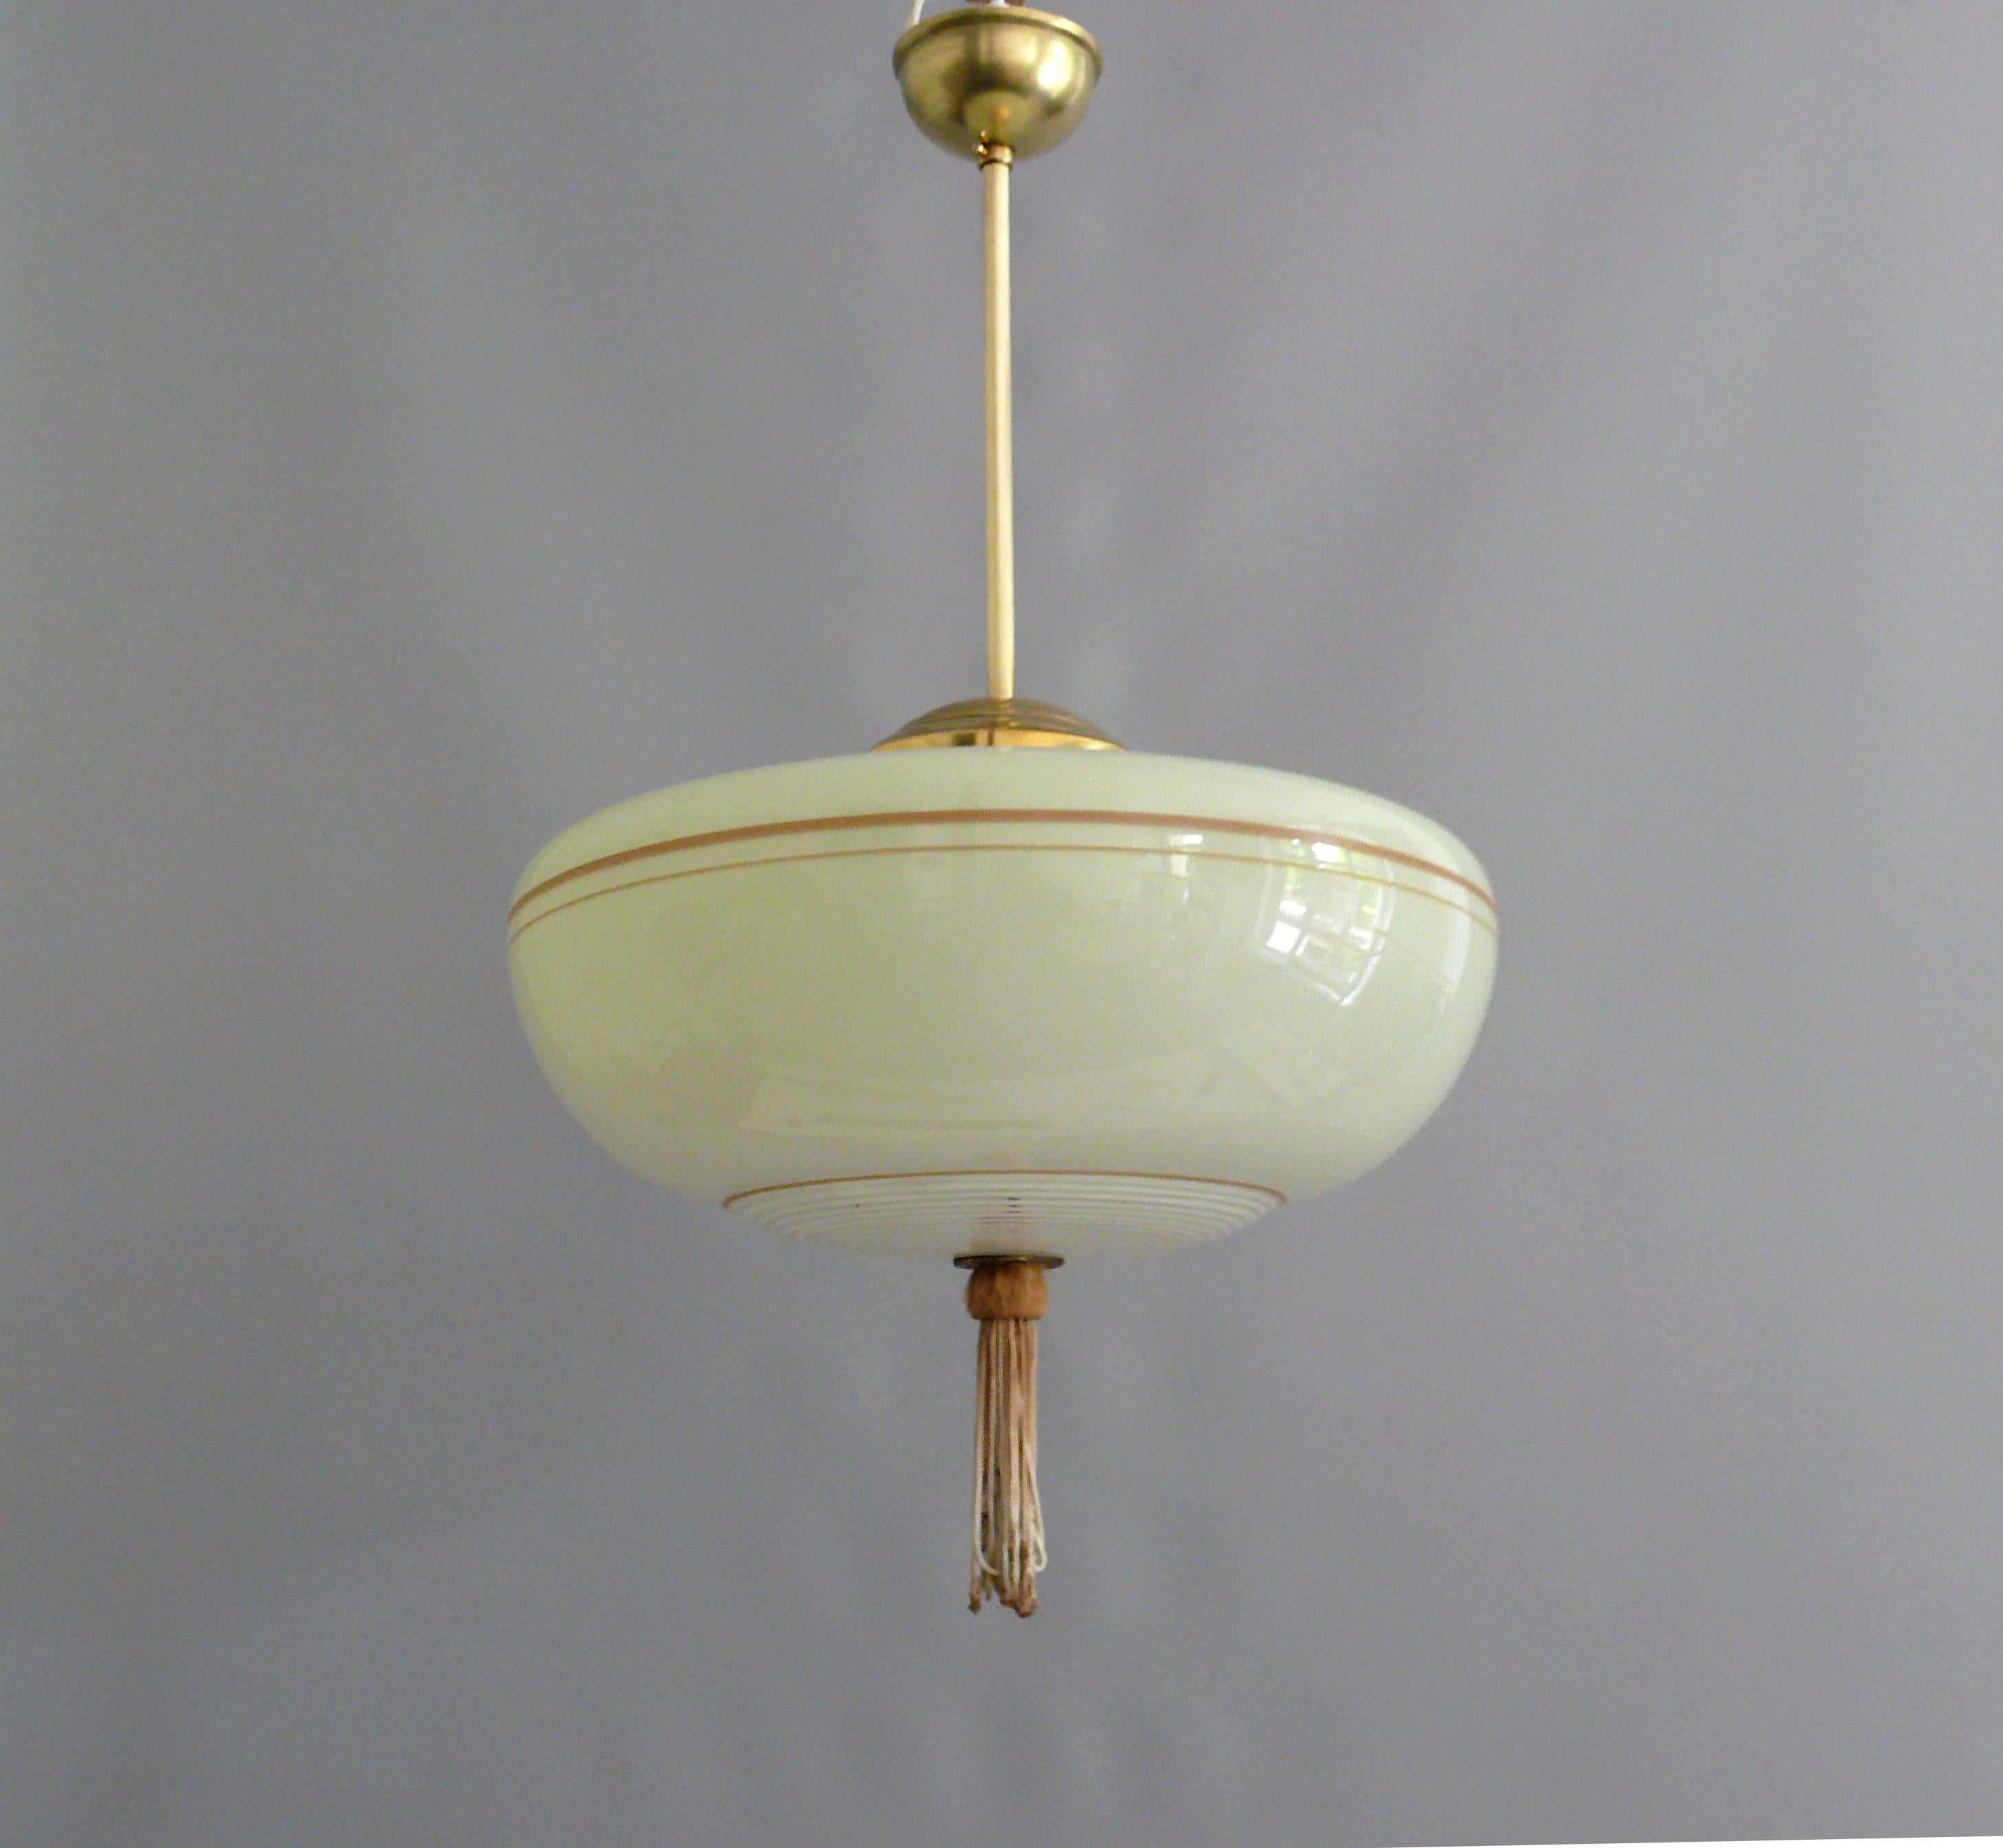 Rod pendant lamp from the 1930s - 1950s with a beige glass shade and brass suspension.

The glass shade has radial decorative stripes in the lower area and a tassel typical of the time in the middle at the bottom. The glass holder, rod and canopy